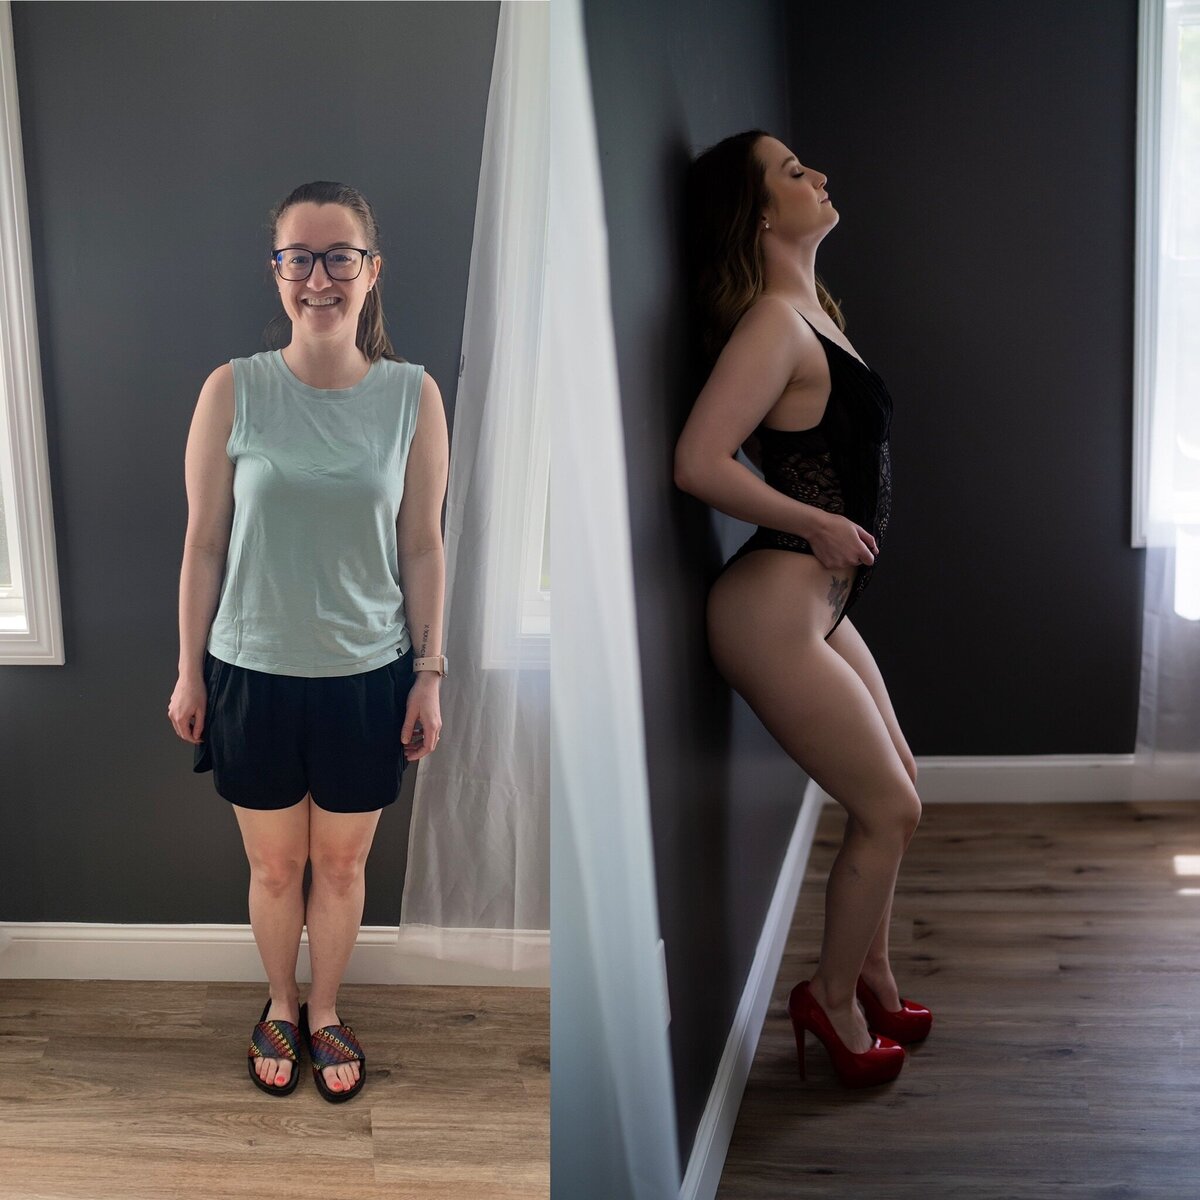 A woman stands in workout clothes before she gets prepped for her session in black lingerie and red shoes